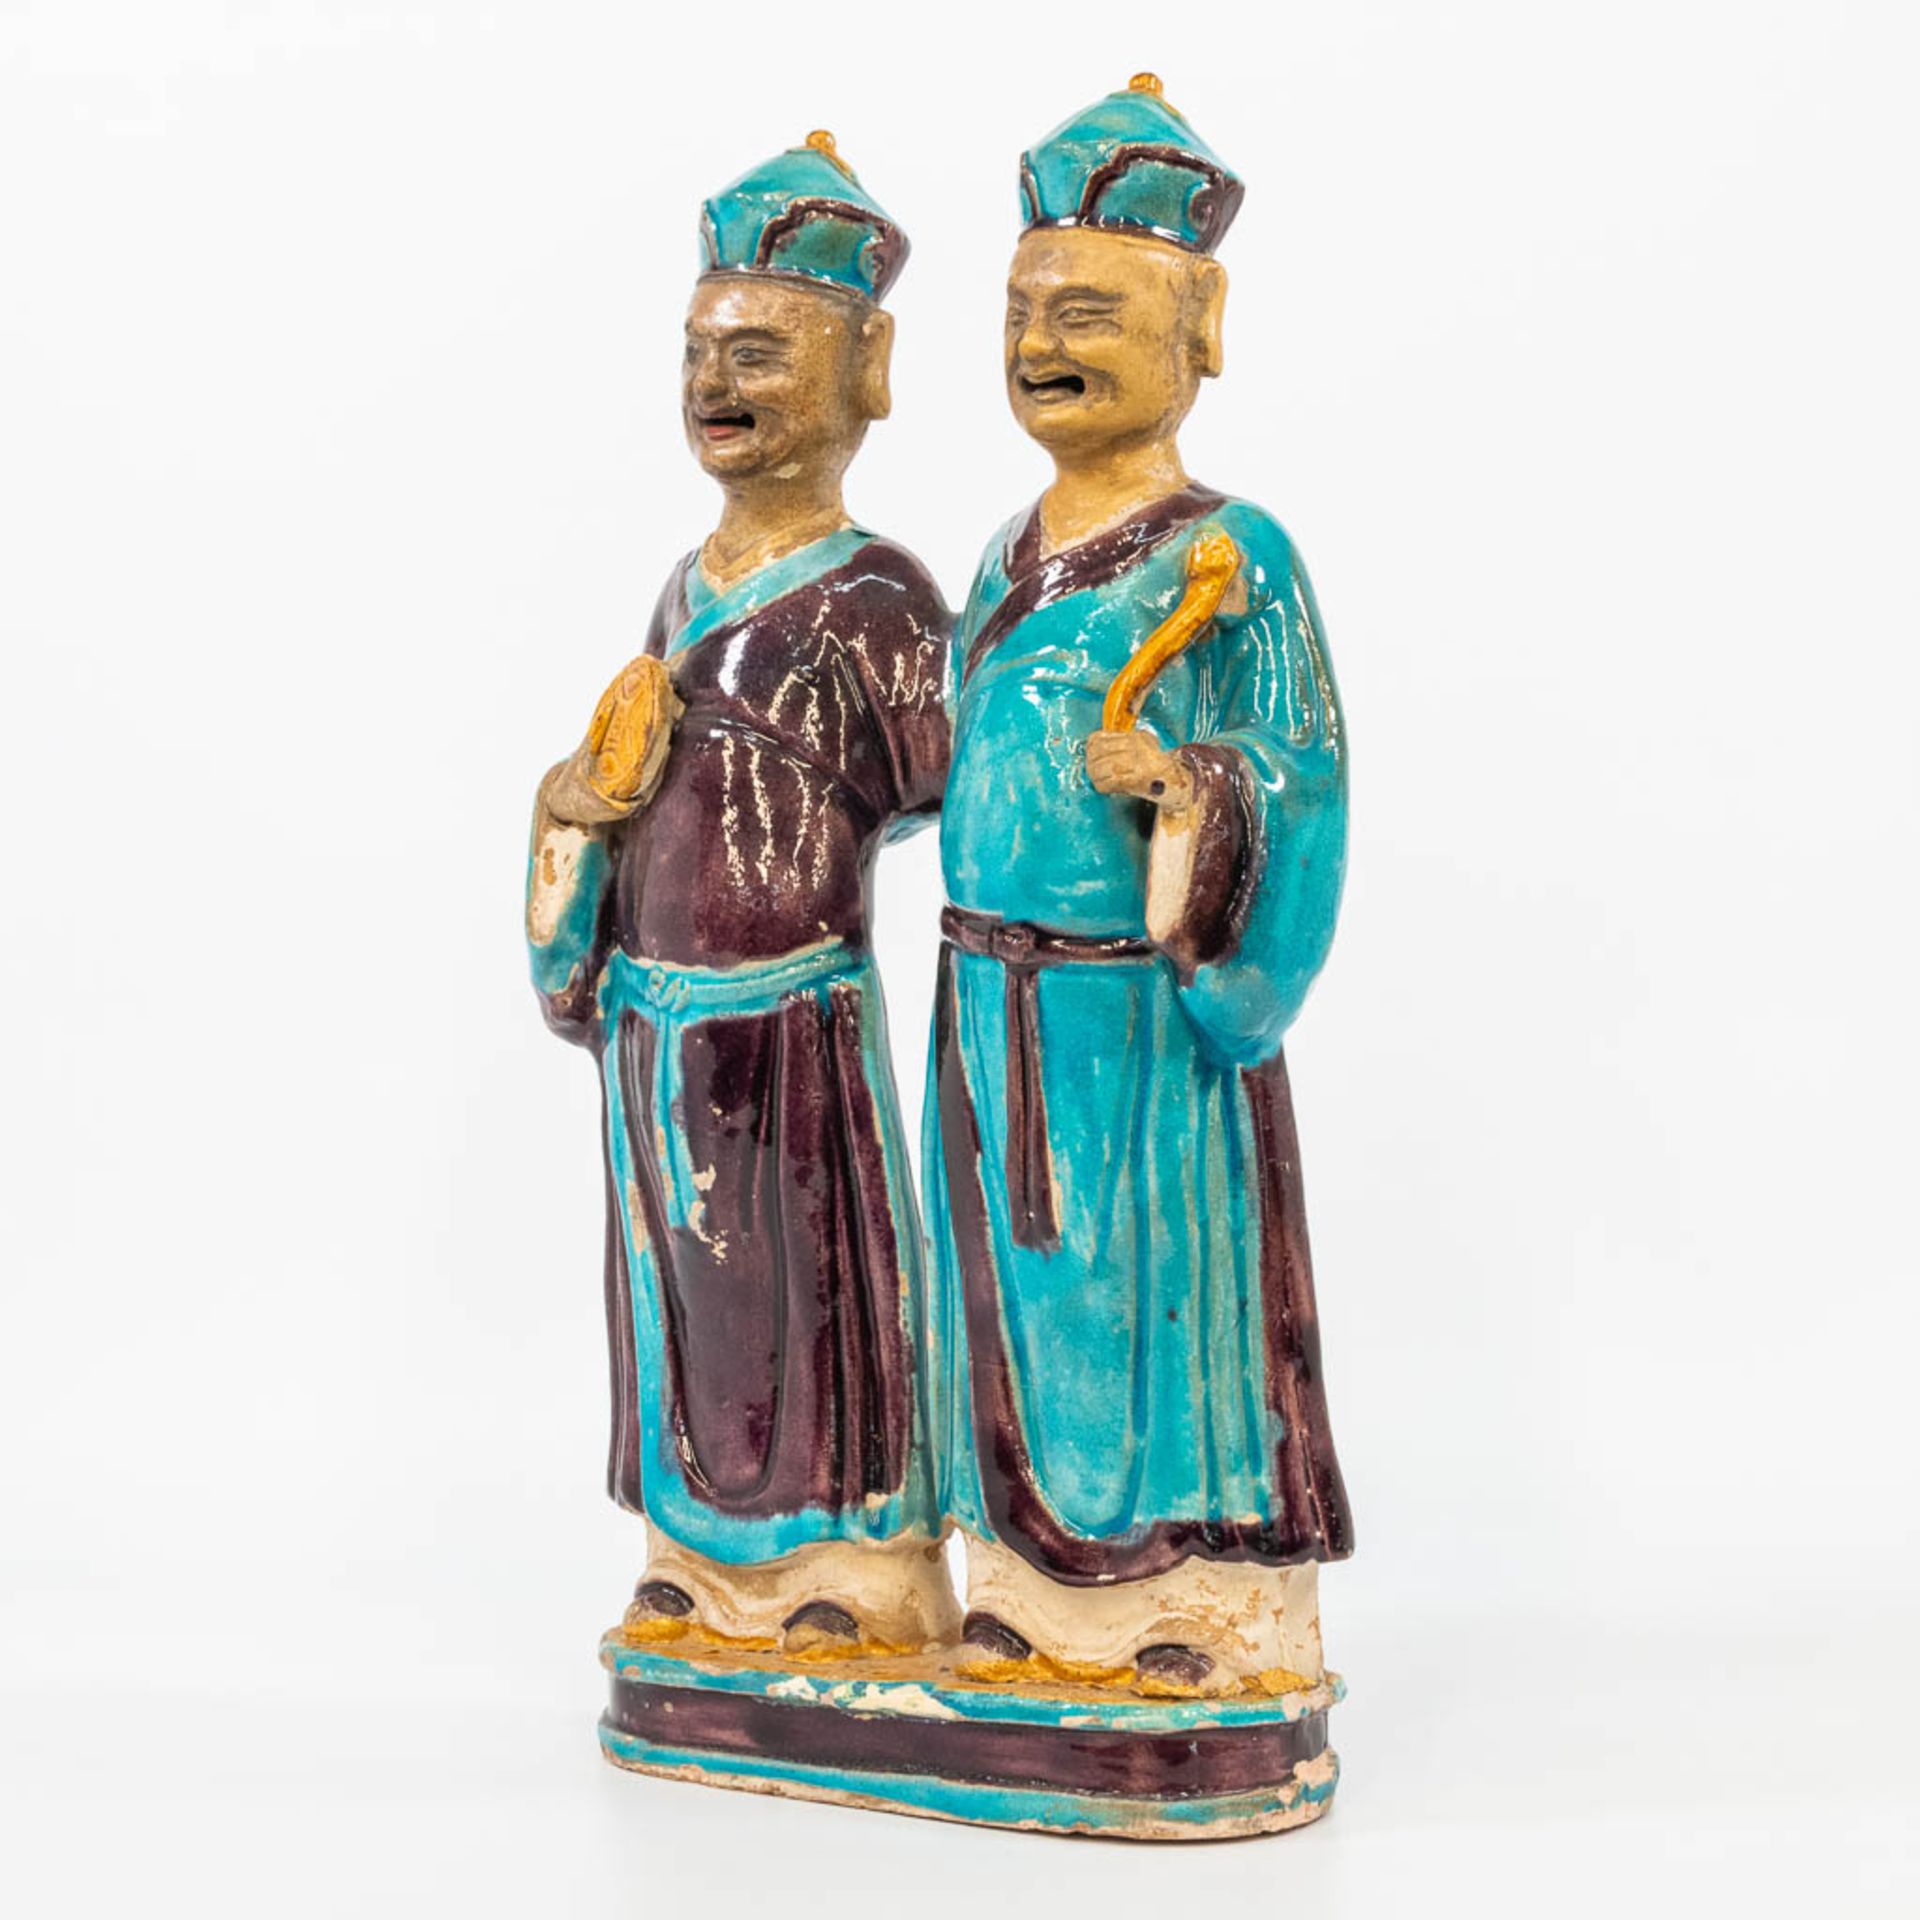 A statue made of glazed earthenware, a pair of Easern figurines. (8,5 x 24 x 41 cm) - Bild 6 aus 16